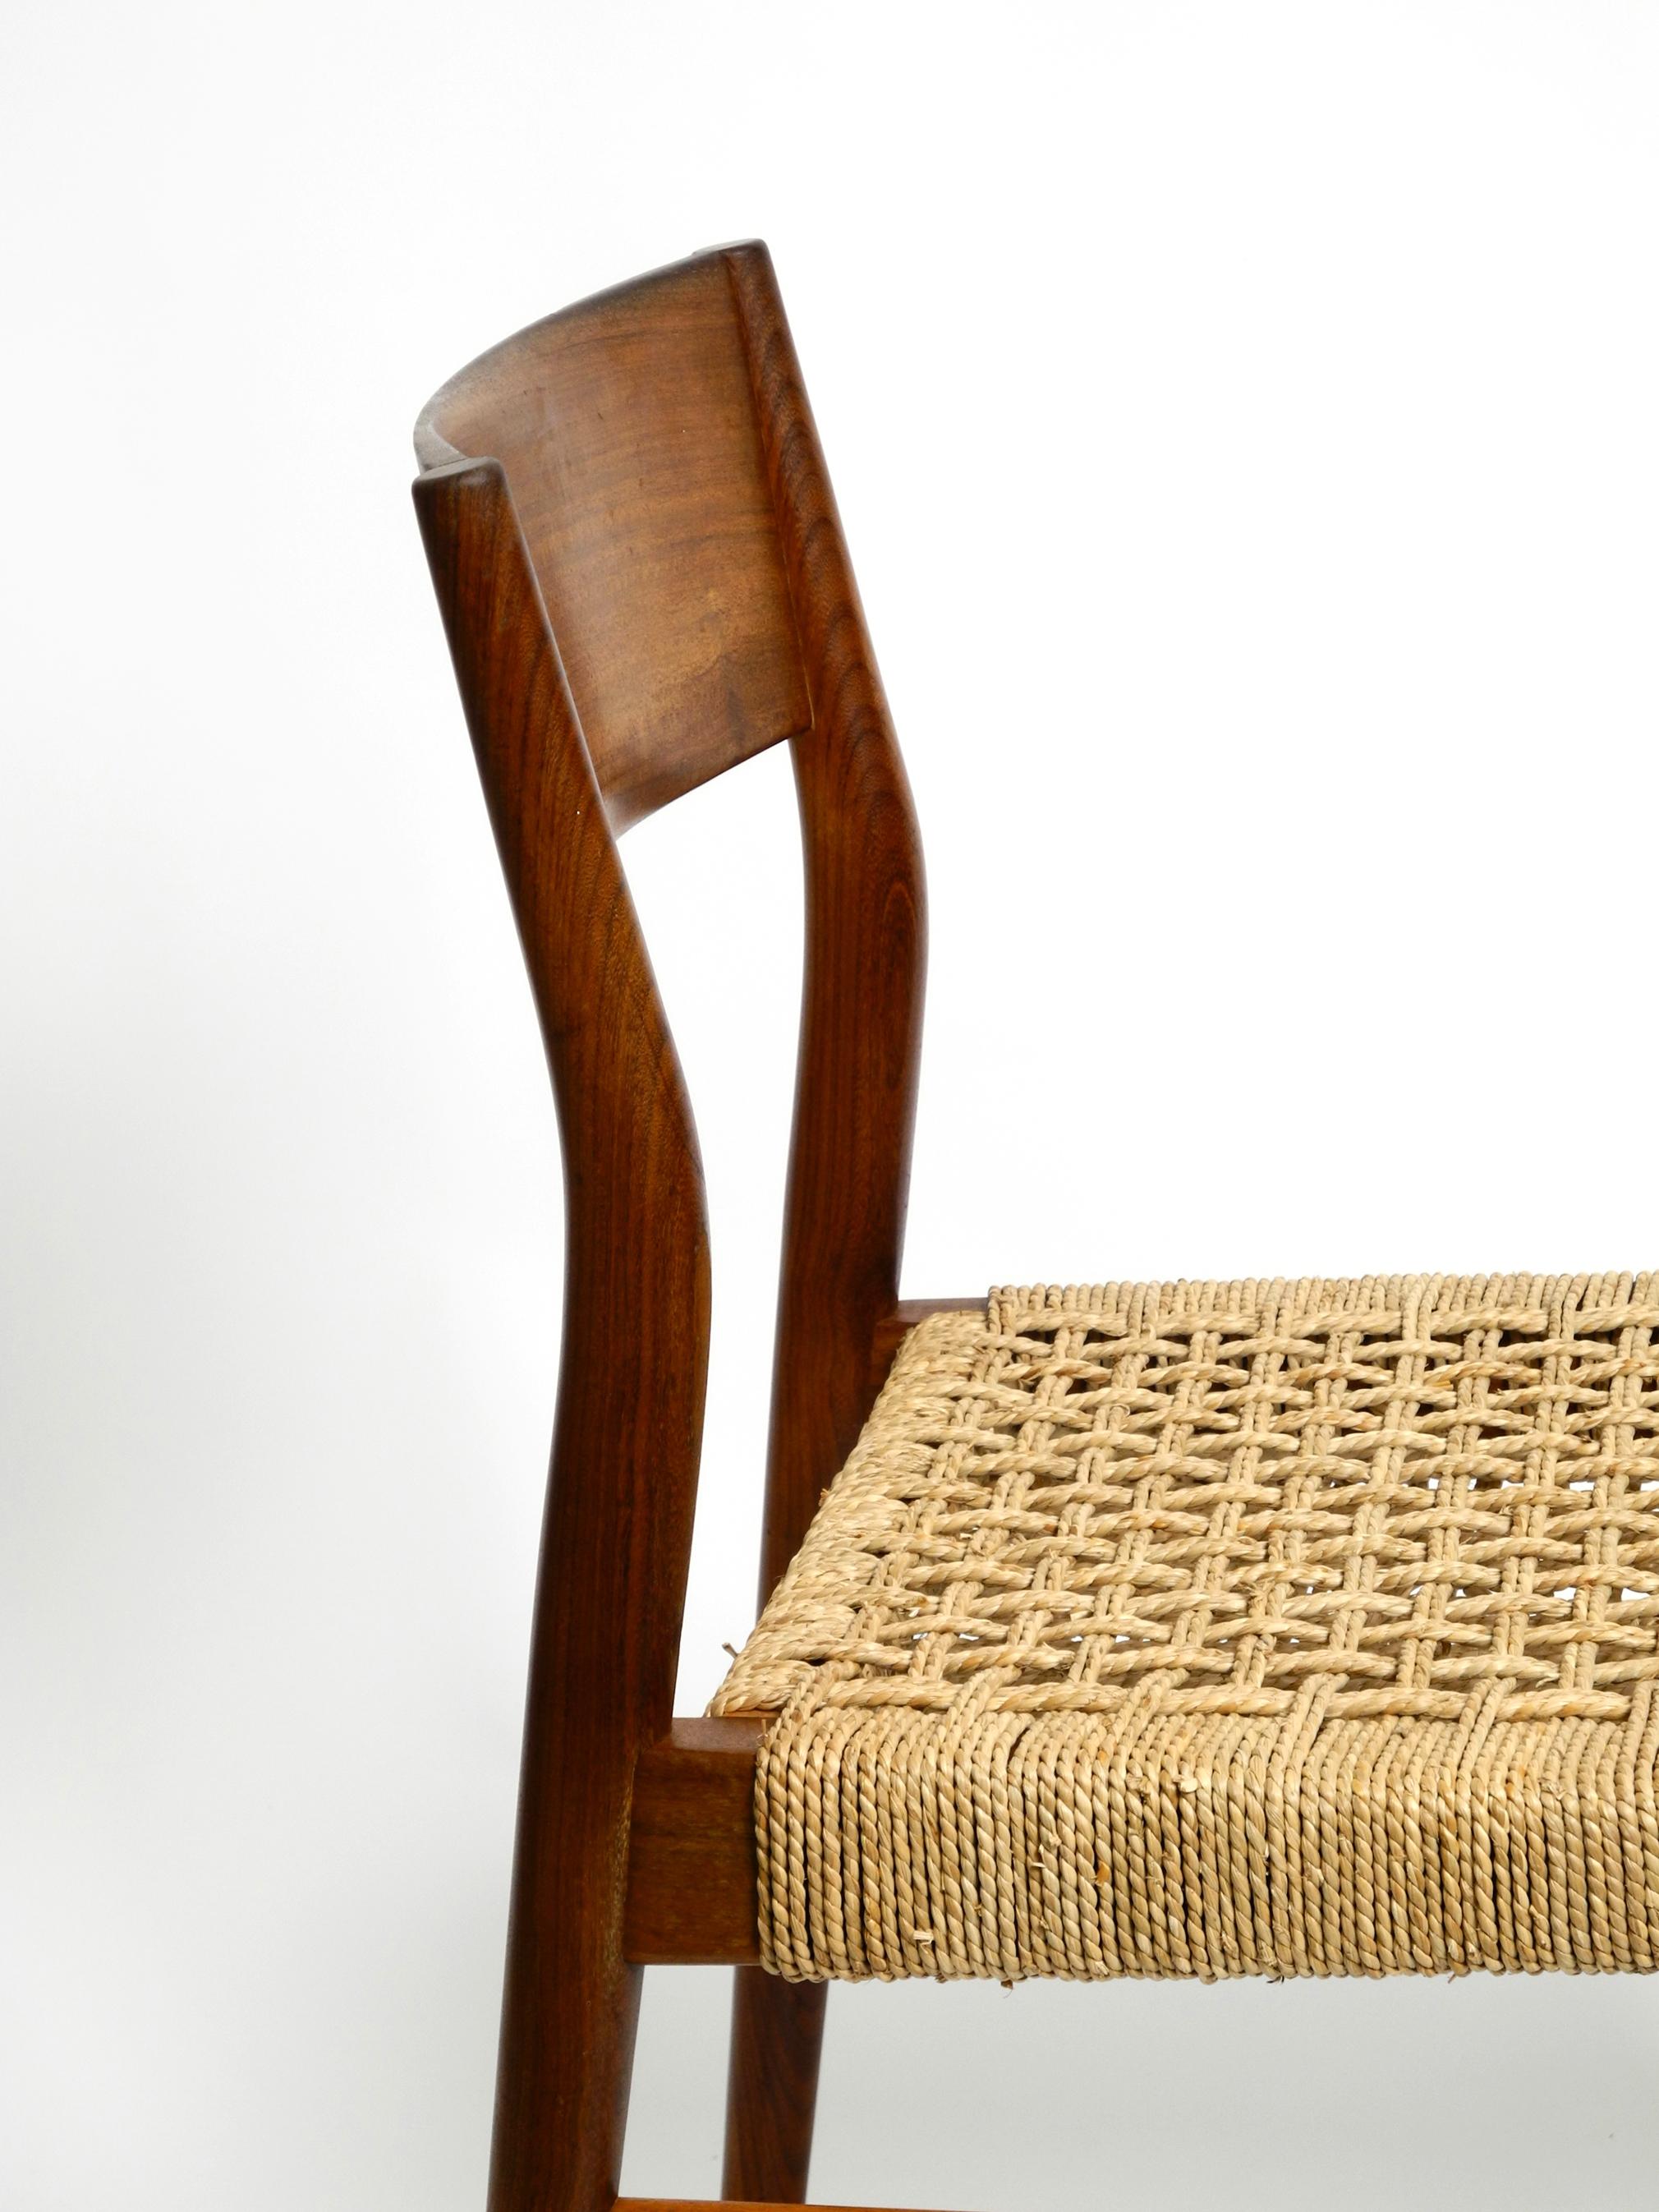 Two Original 1960s Wilkhahn Chairs Made of Walnut with Wicker Cane For Sale 6